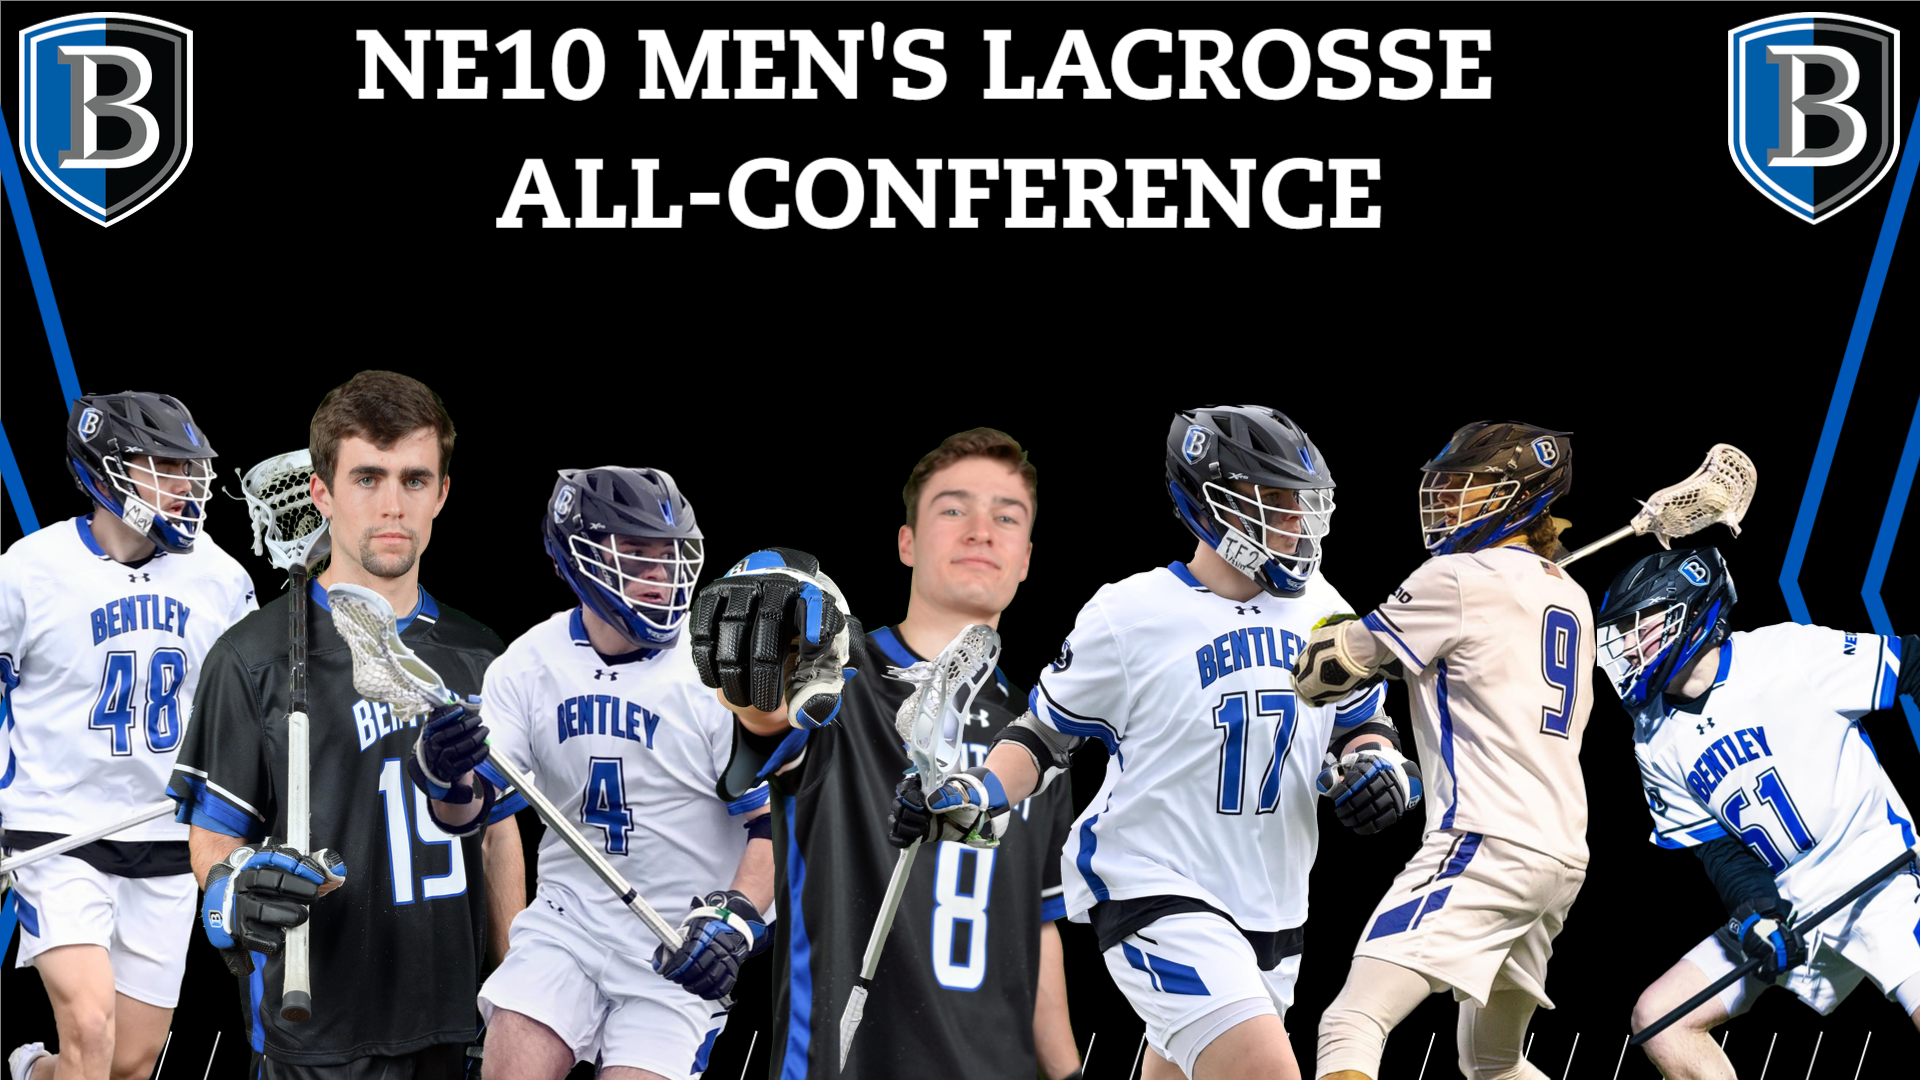 Seven Bentley Players Named to the Northeast-10 All-Conference Teams